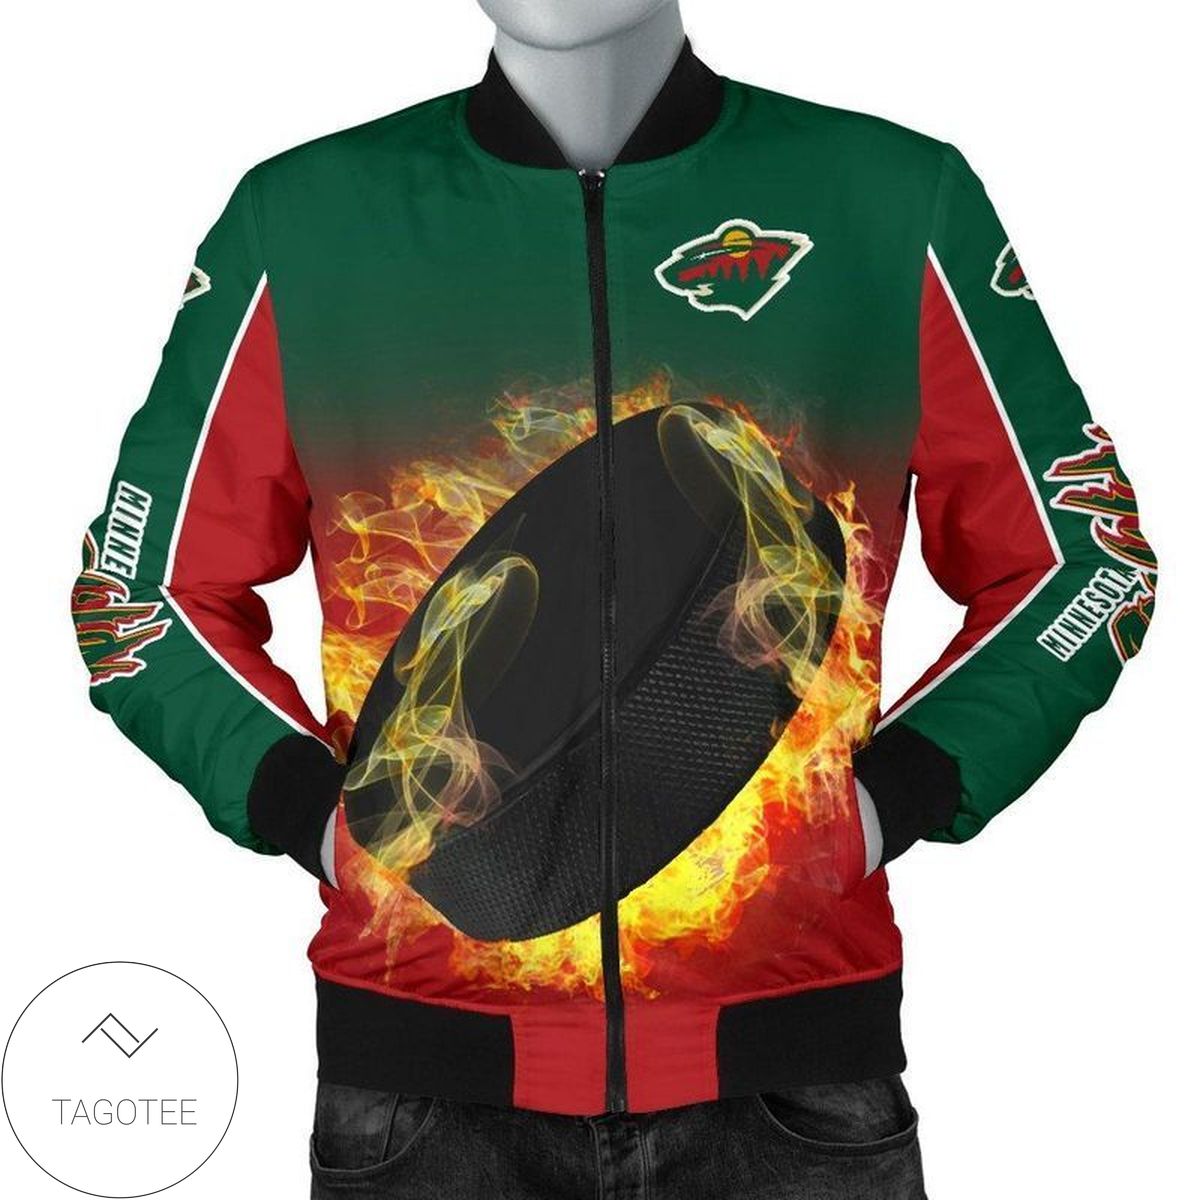 Playing Game With Minnesota Wild Logo Team 3d Printed Unisex Bomber Jacket